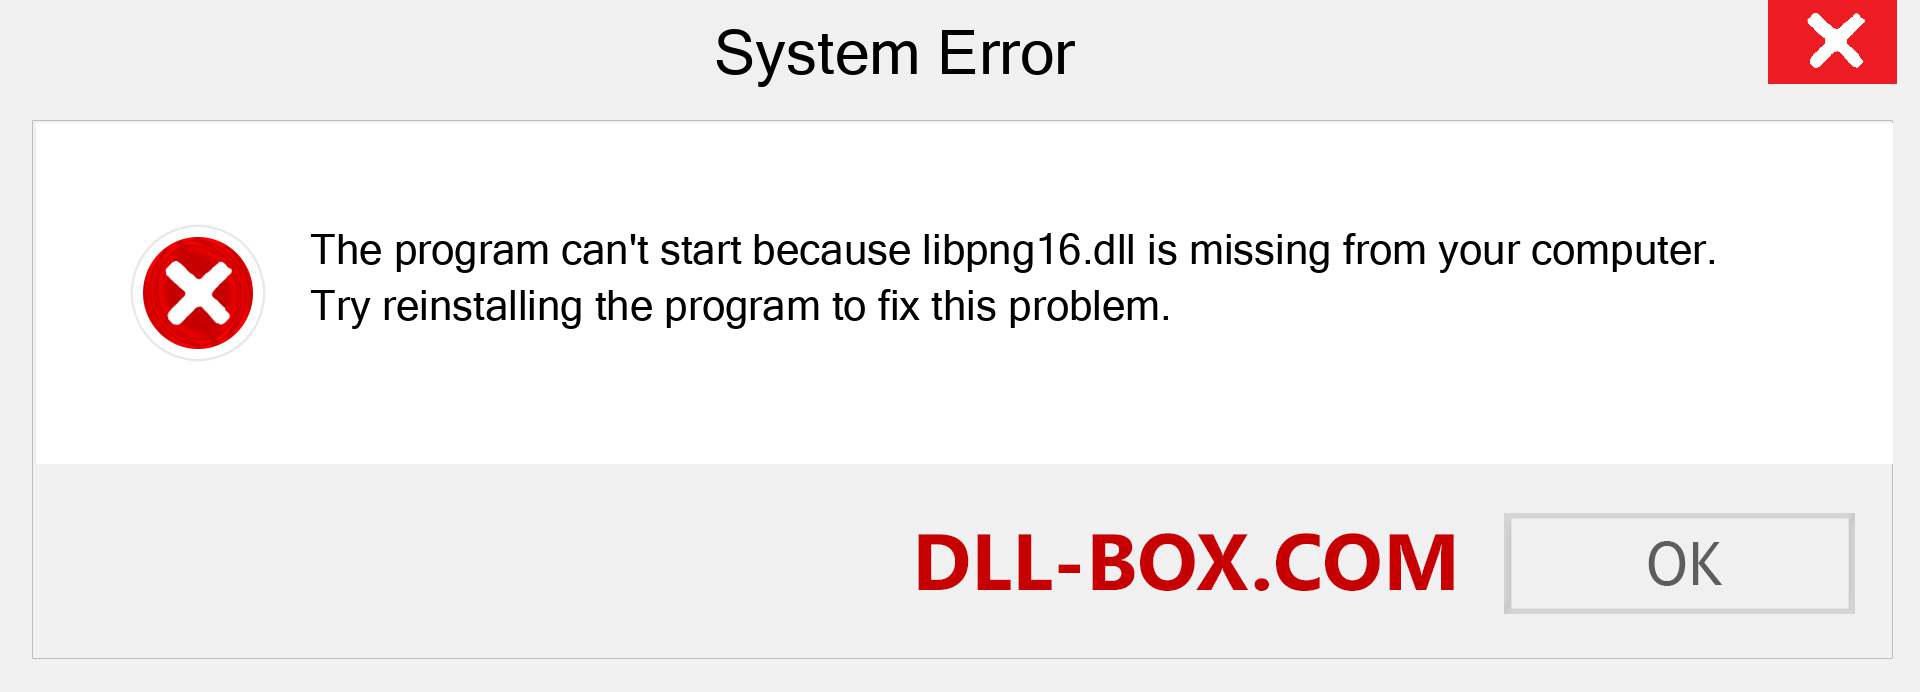  libpng16.dll file is missing?. Download for Windows 7, 8, 10 - Fix  libpng16 dll Missing Error on Windows, photos, images